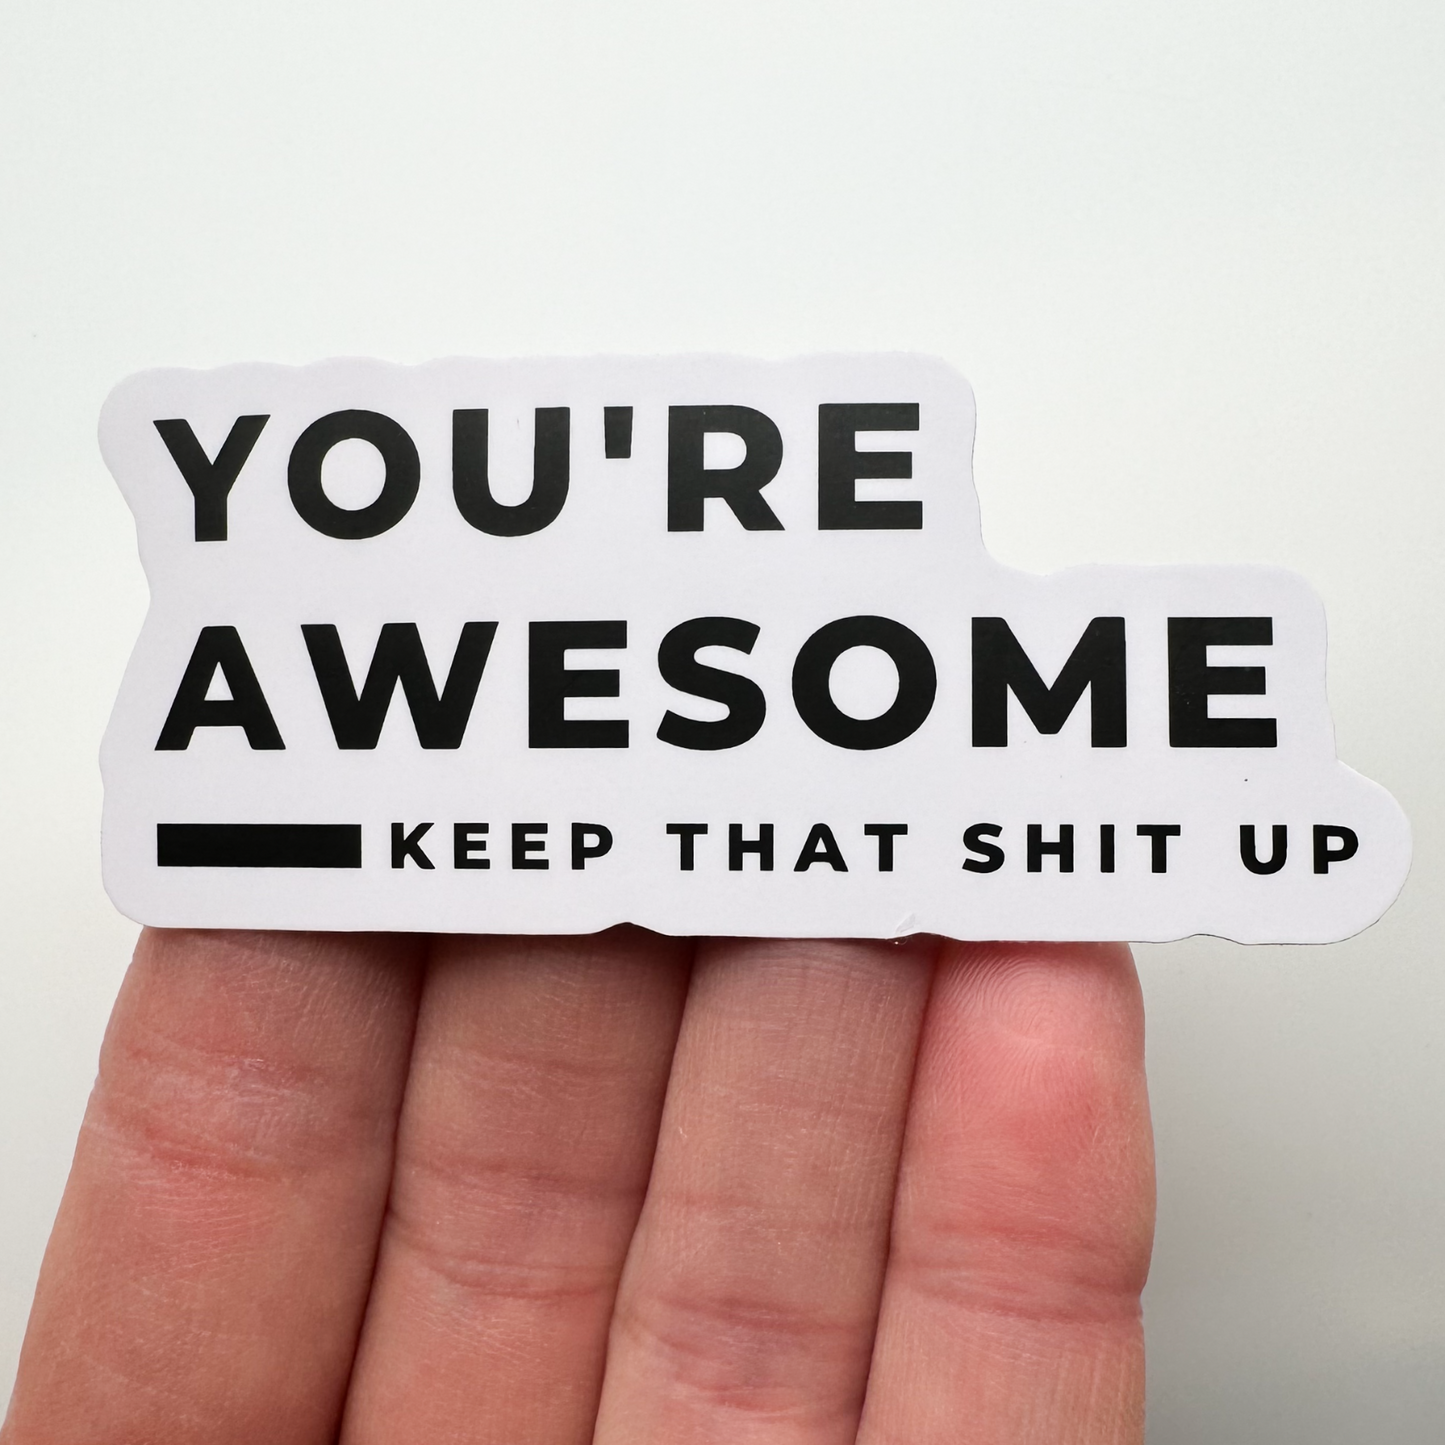 You're awesome sticker shown against fingers for scale (it's wider than 4 fingers)